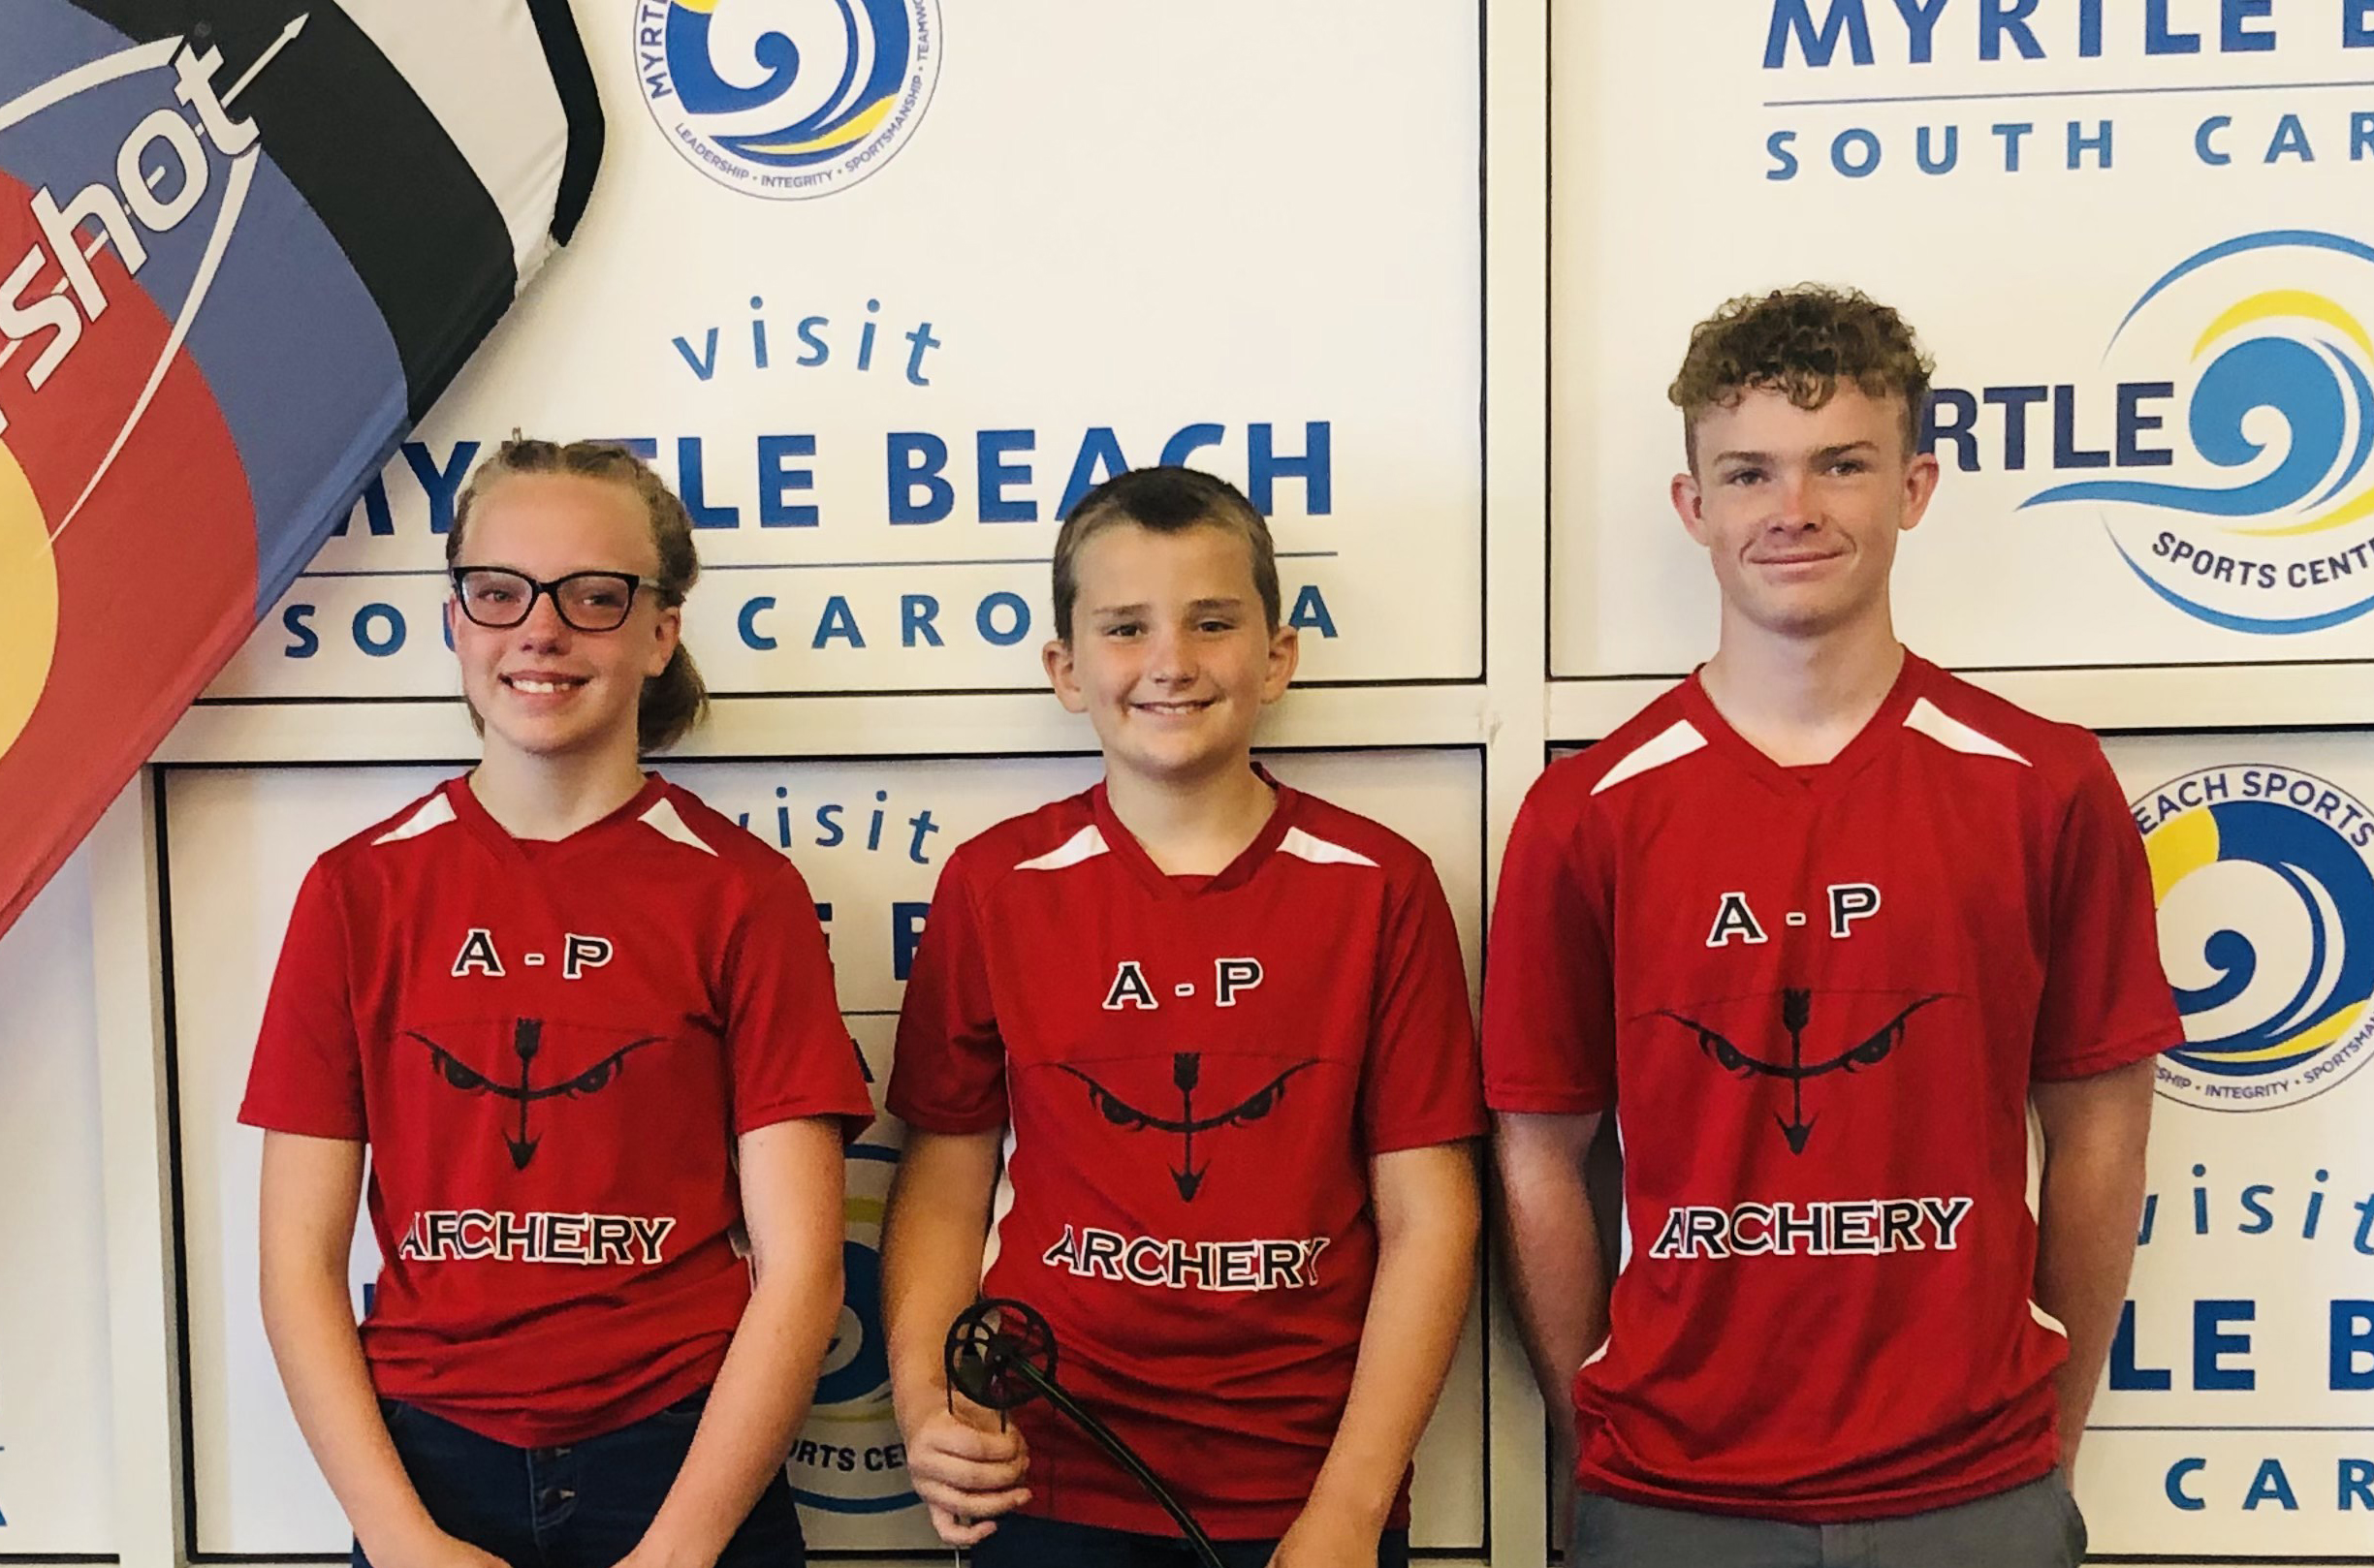 From left, Avery Freund, Kalob Hoppenworth and Kolbe Meyer represented Aplington-Parkersburg Archery at the NASP championships. (Contributed photo)